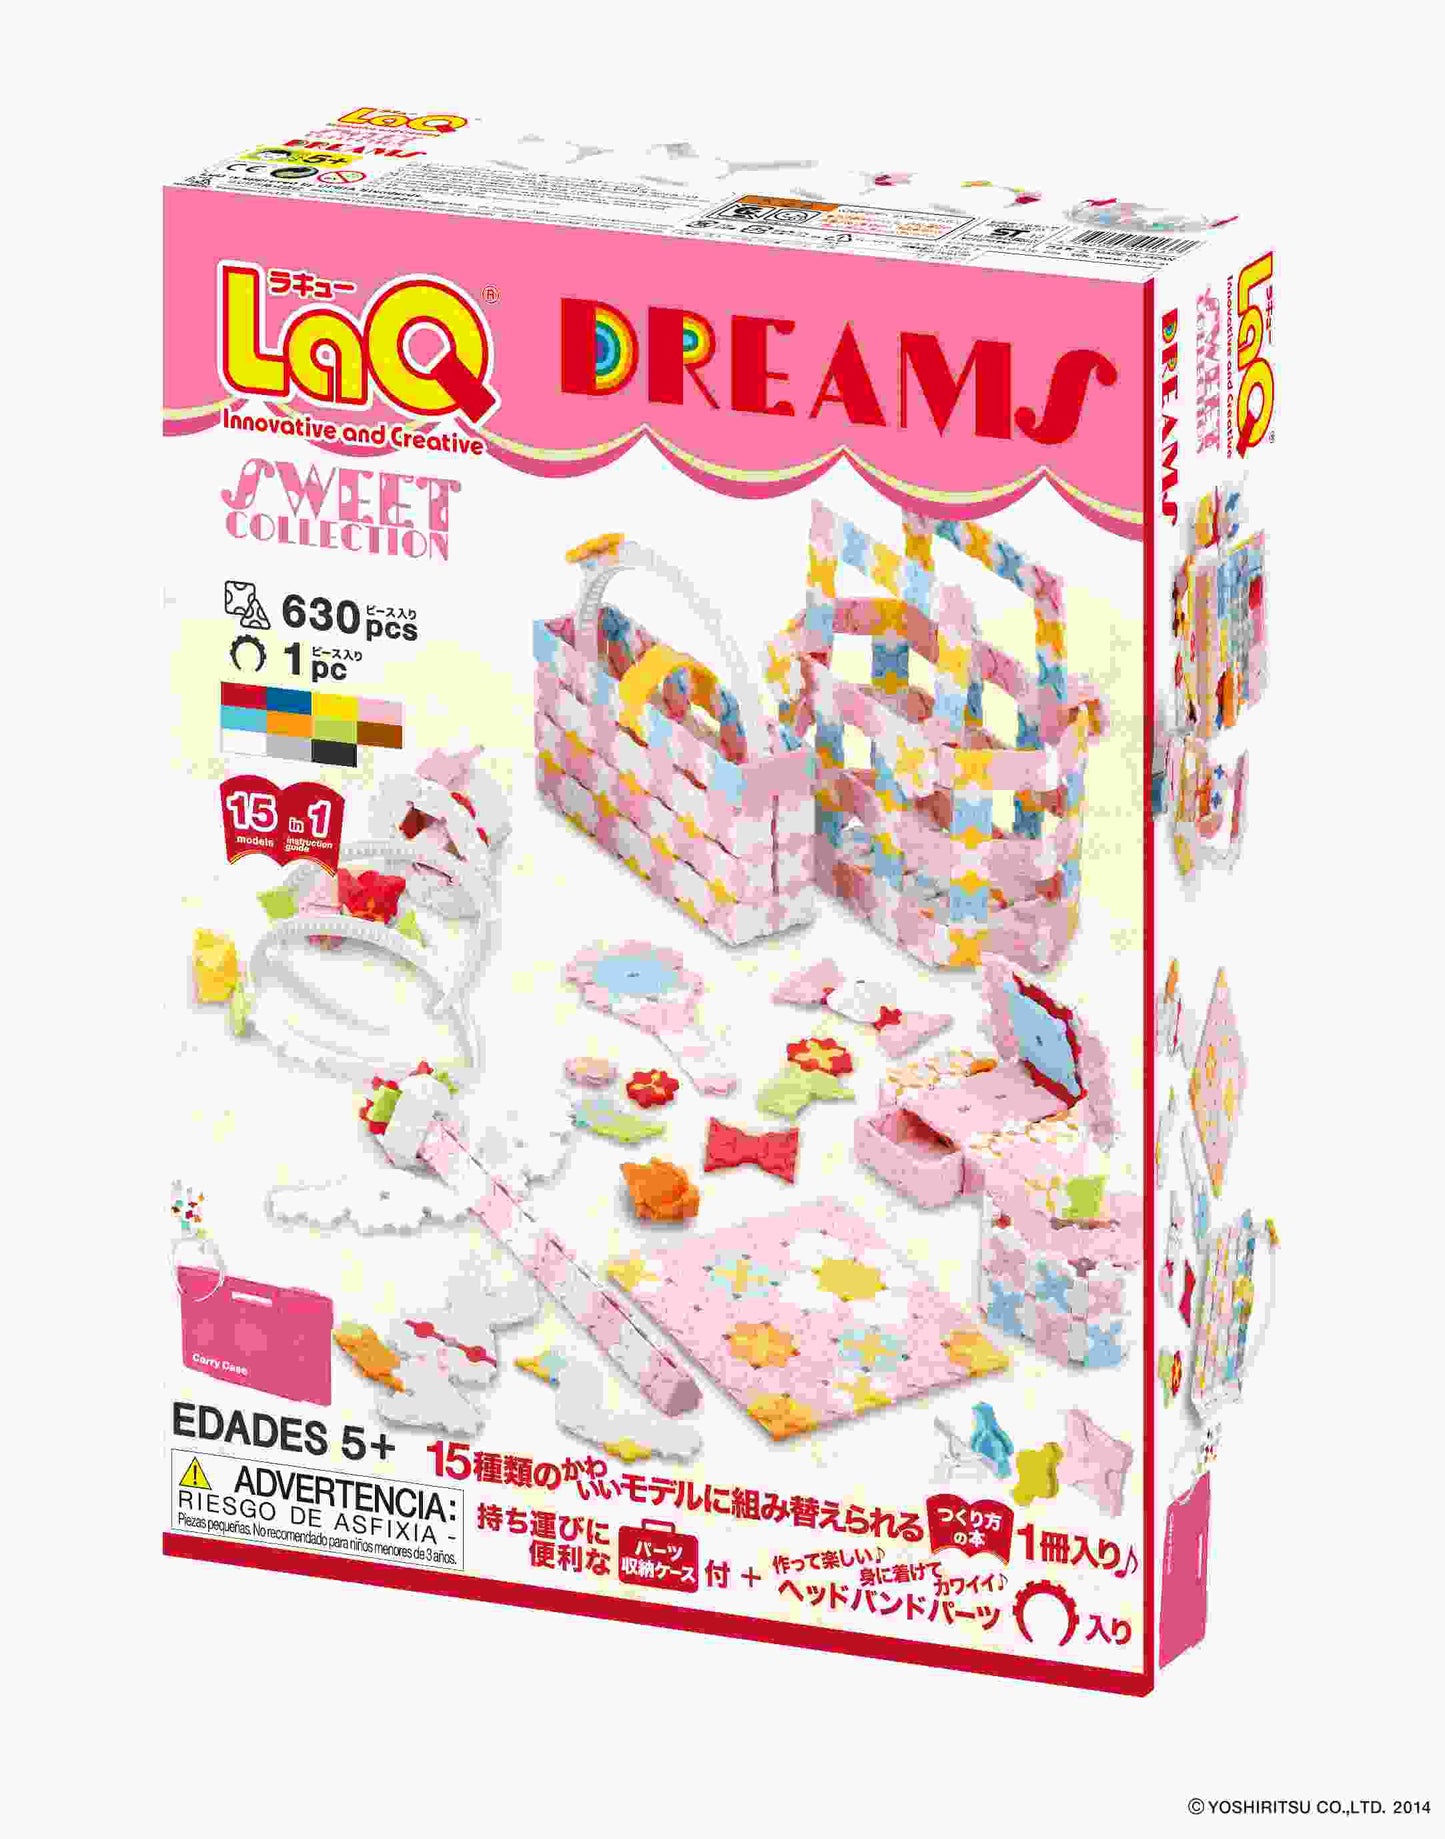 LaQ SWEET COLLECTION DREAMS - 15 MODELS, 630 PIECES